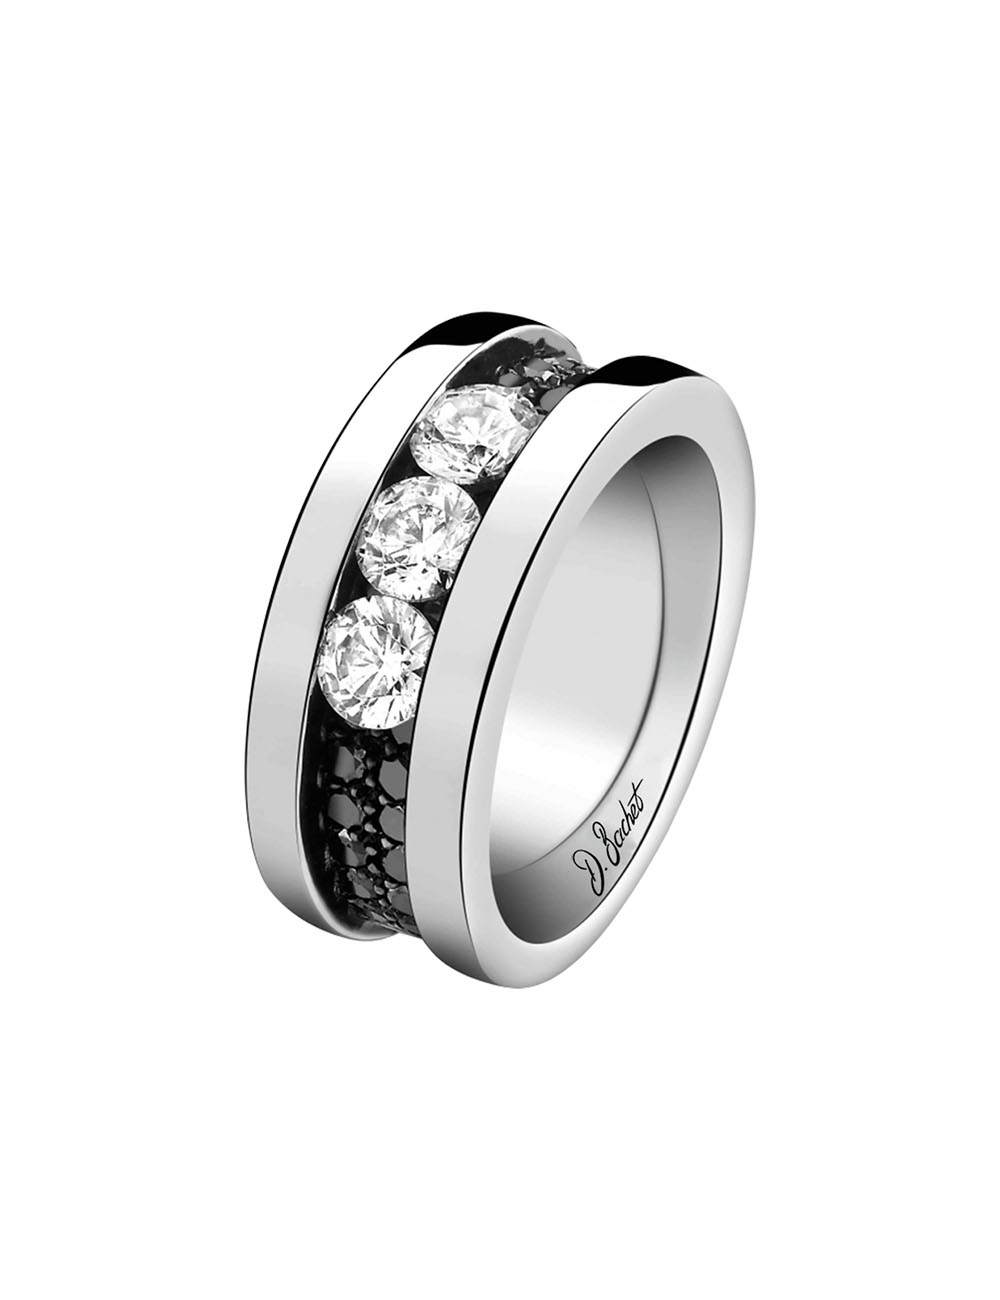 Modern trilogy ring for women set with 3 white diamonds of 0.30 carat each and black diamonds